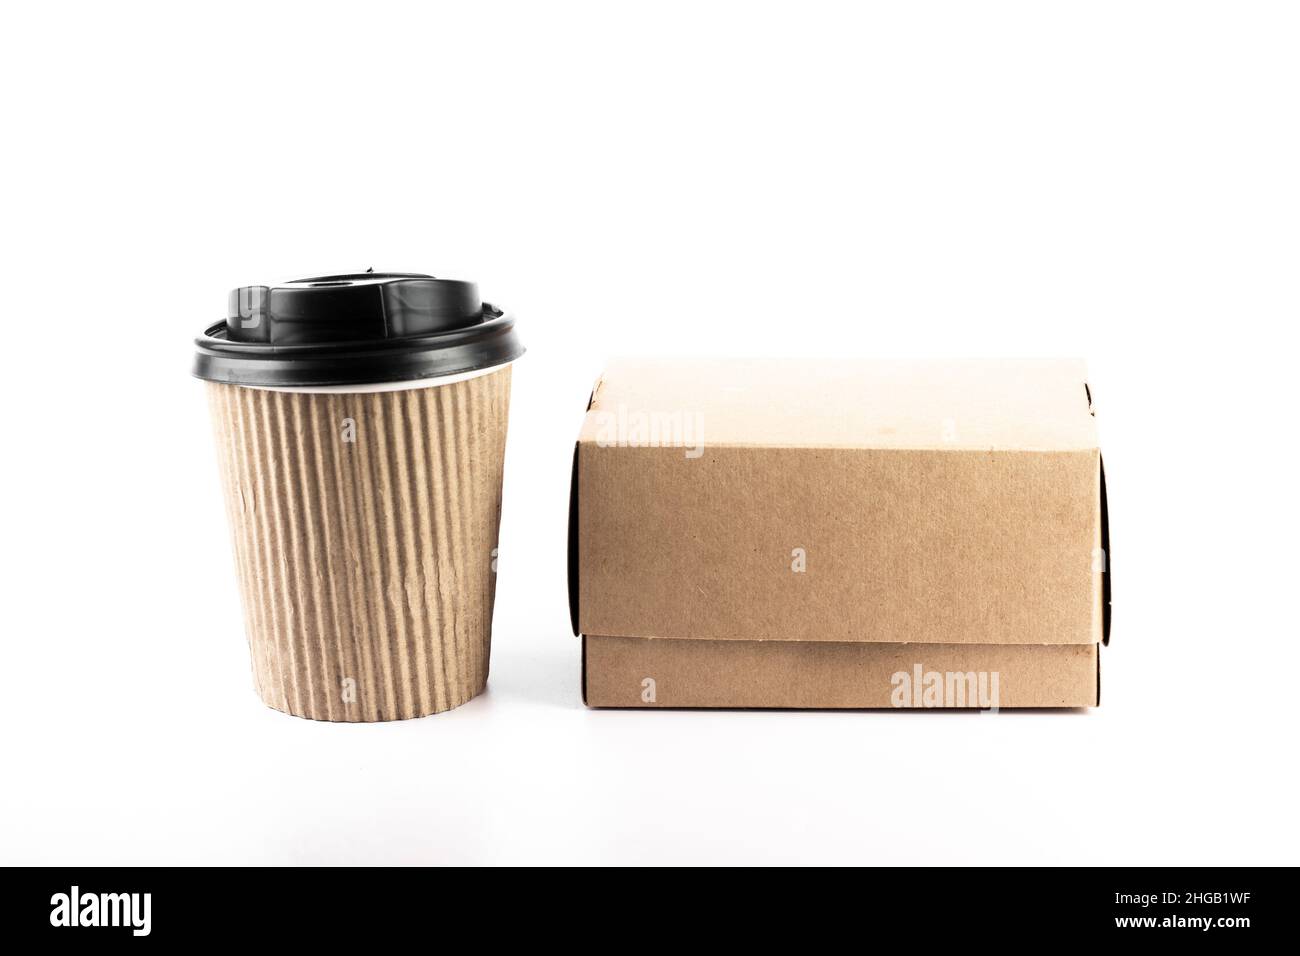 Kraft paper coffee cup and meal box isolated on white background. Take away delivery concept. Part of set. Stock Photo